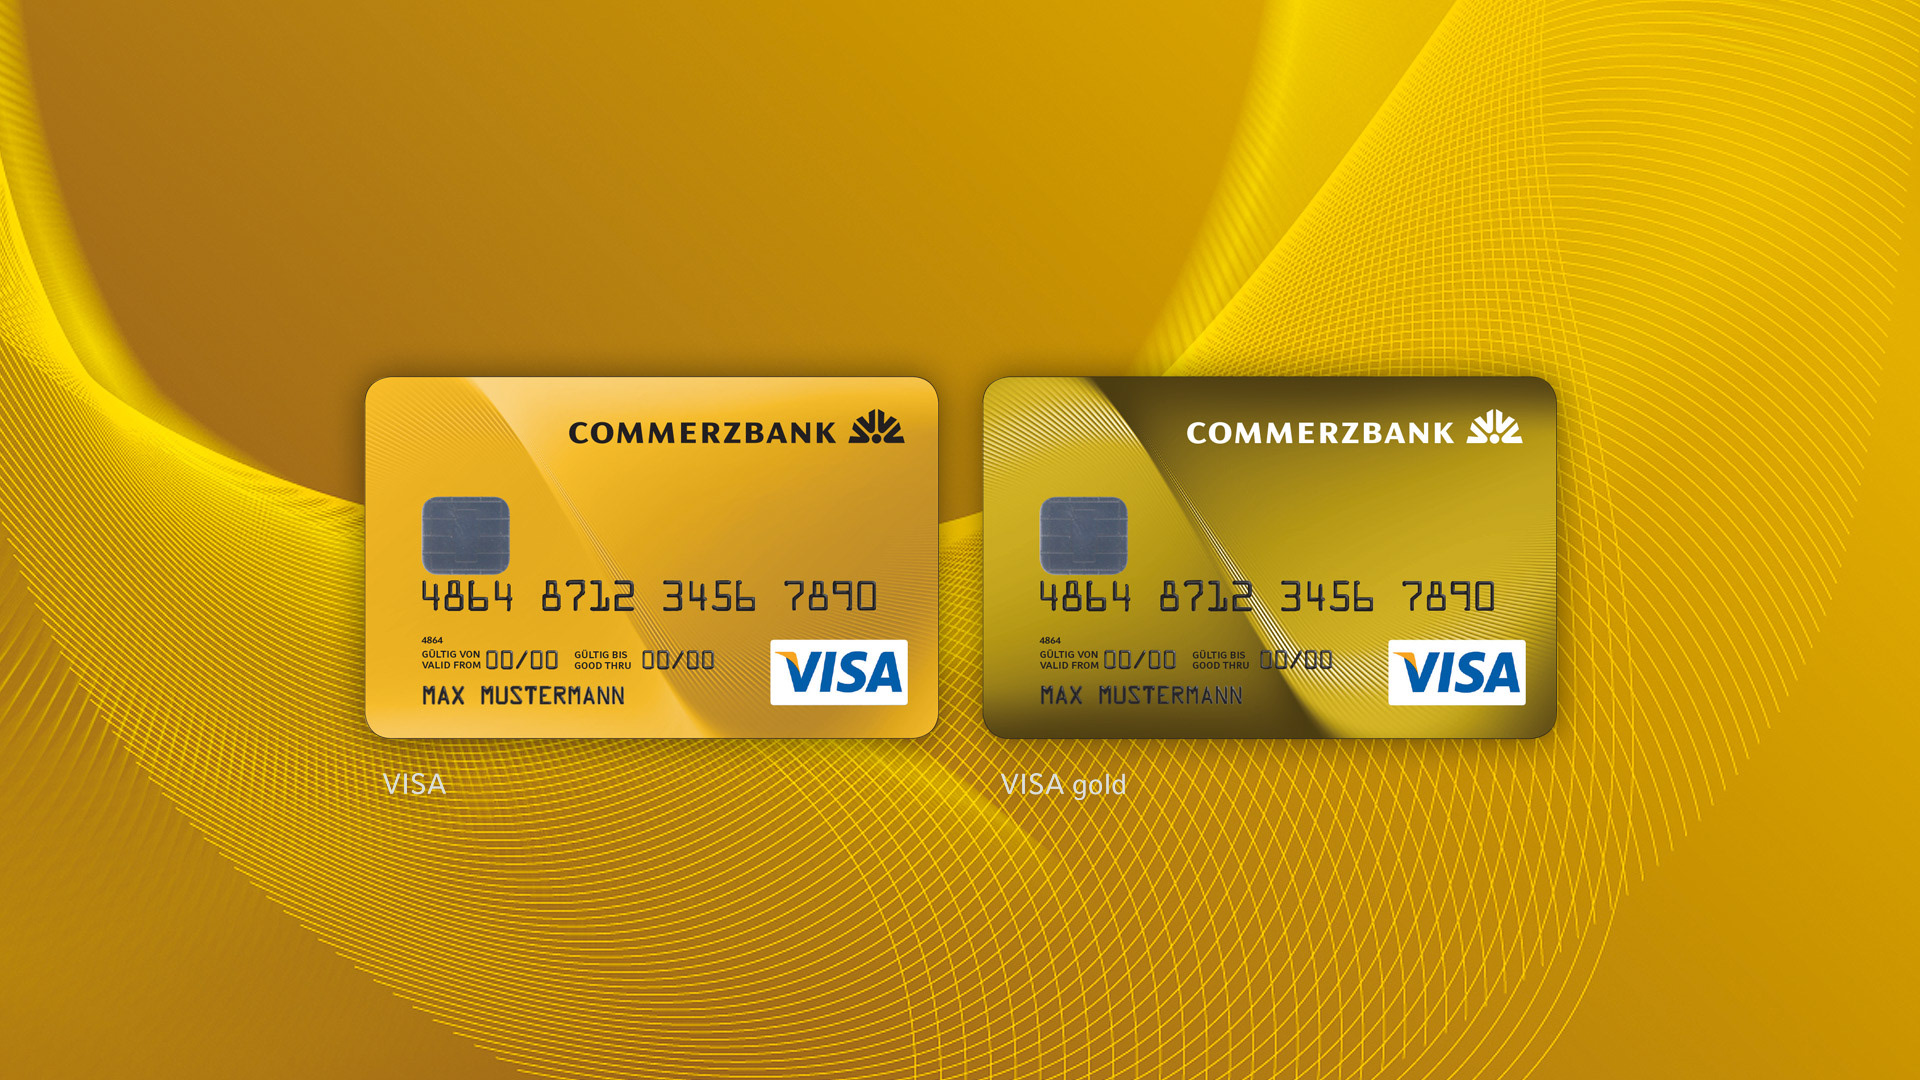 Credit Card with Commerzbank - Learn How to Apply 